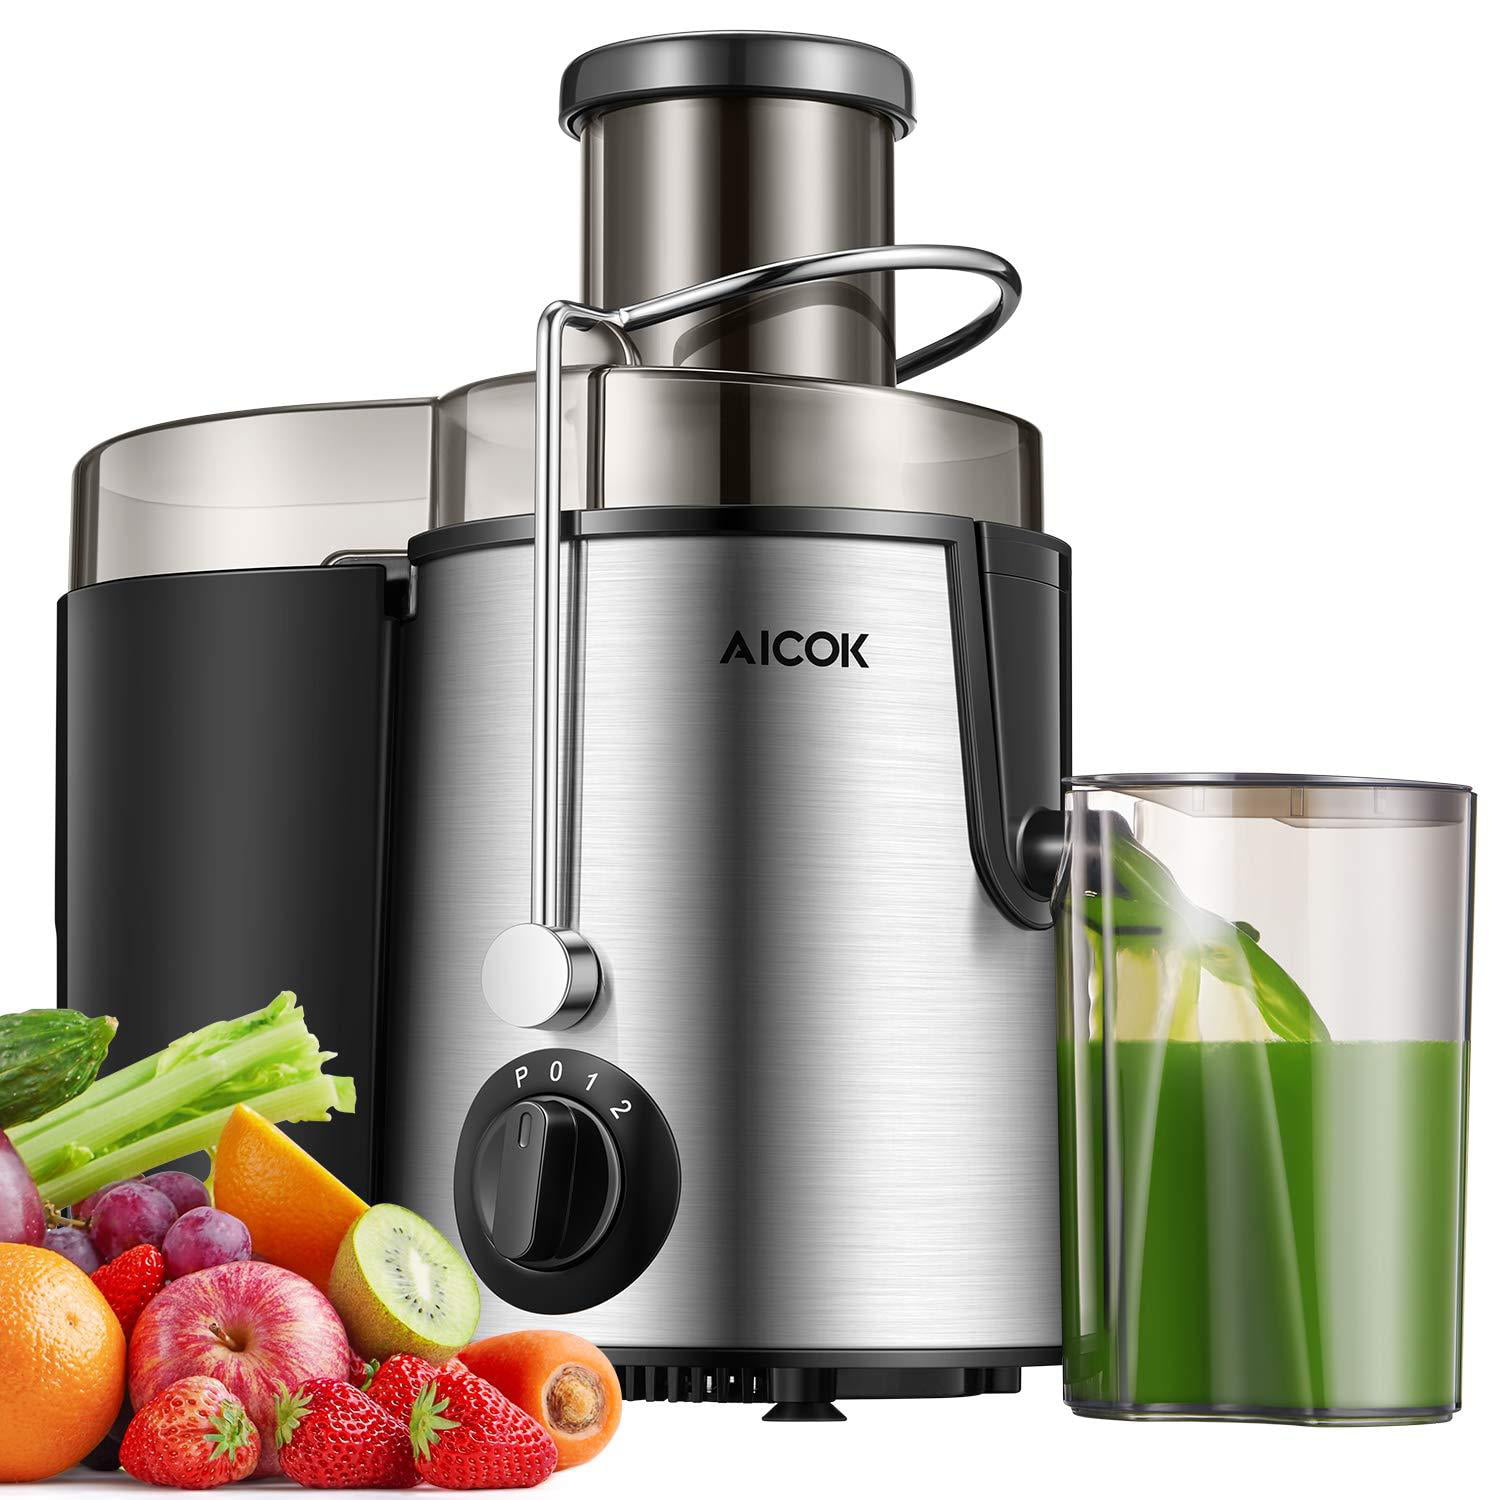 Stainless Steel and BPA-Free Juicer Machine Real 3’’ Whole Fruit and Vegetable Feeder Chute Juice Extractor Dual Speeds Centrifugal Juicer Juicer Anti-drip 